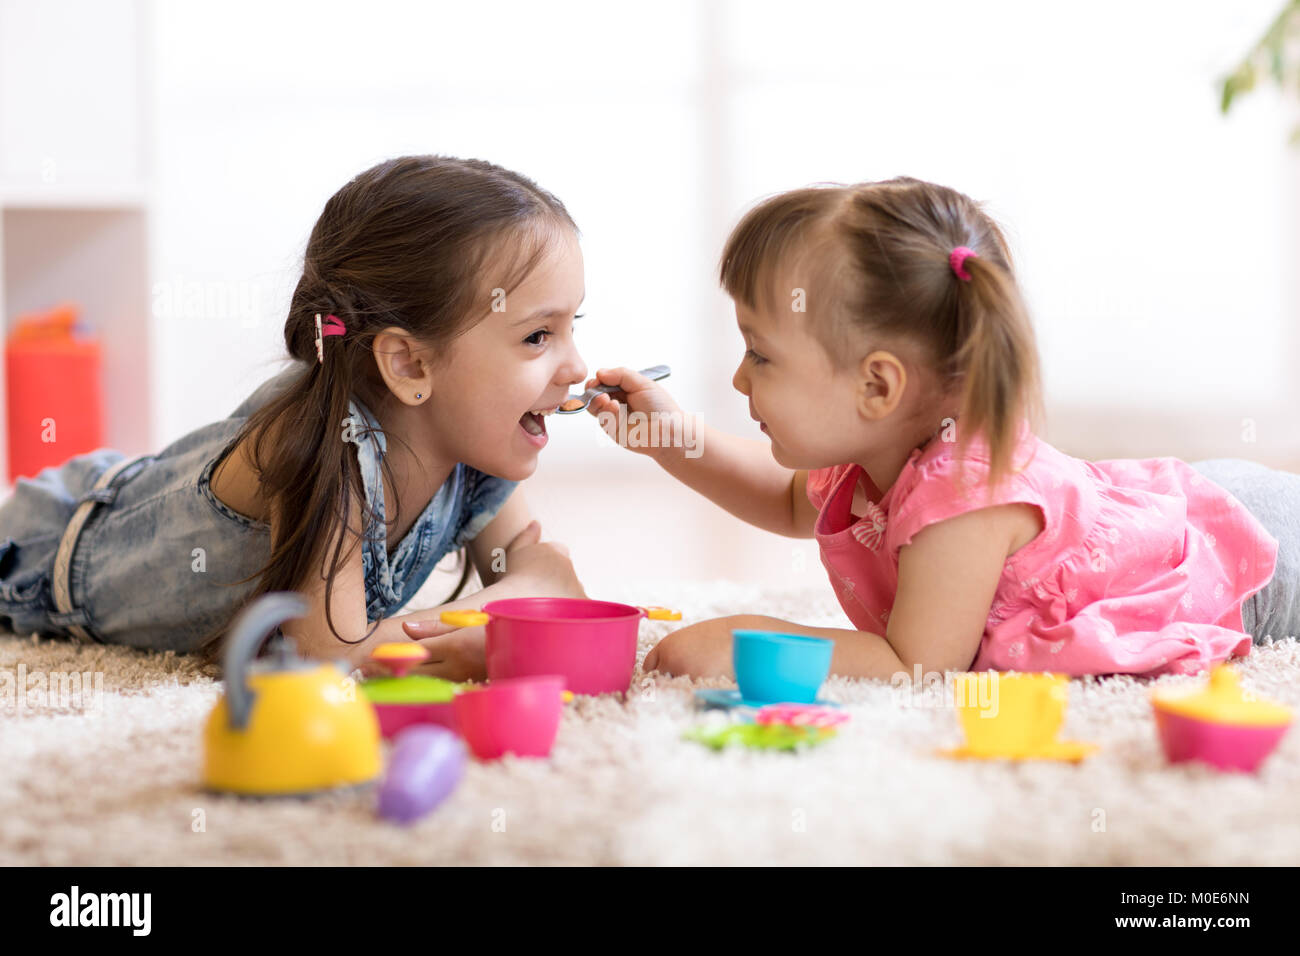 Cute little children playing with kitchenware toys while lying on floor at home Stock Photo